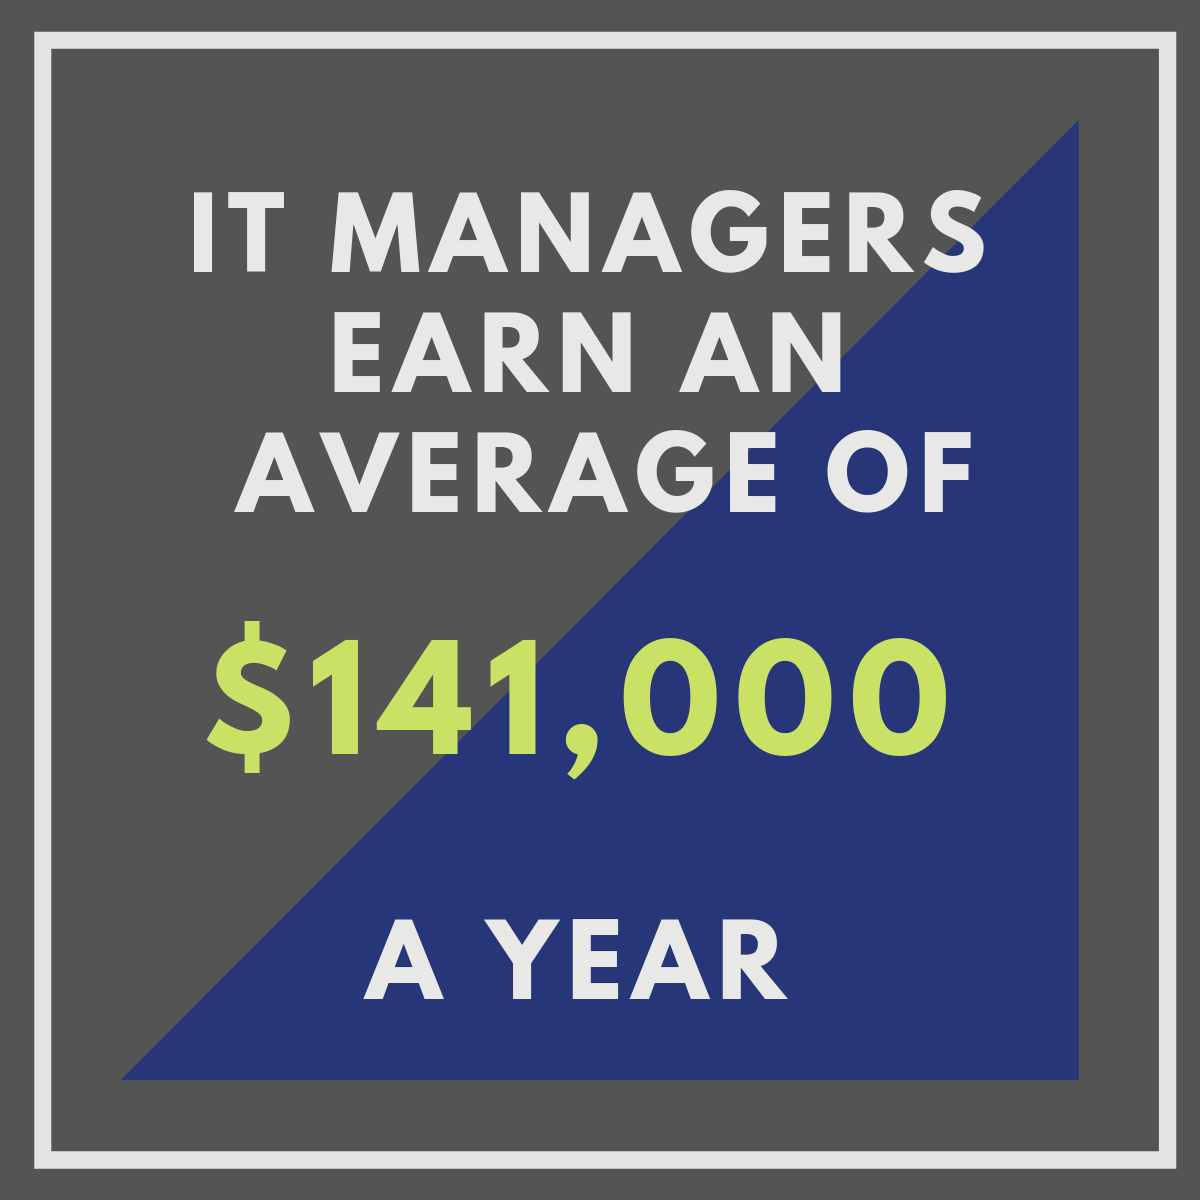 IT managers earn an average of $141,000 a year.